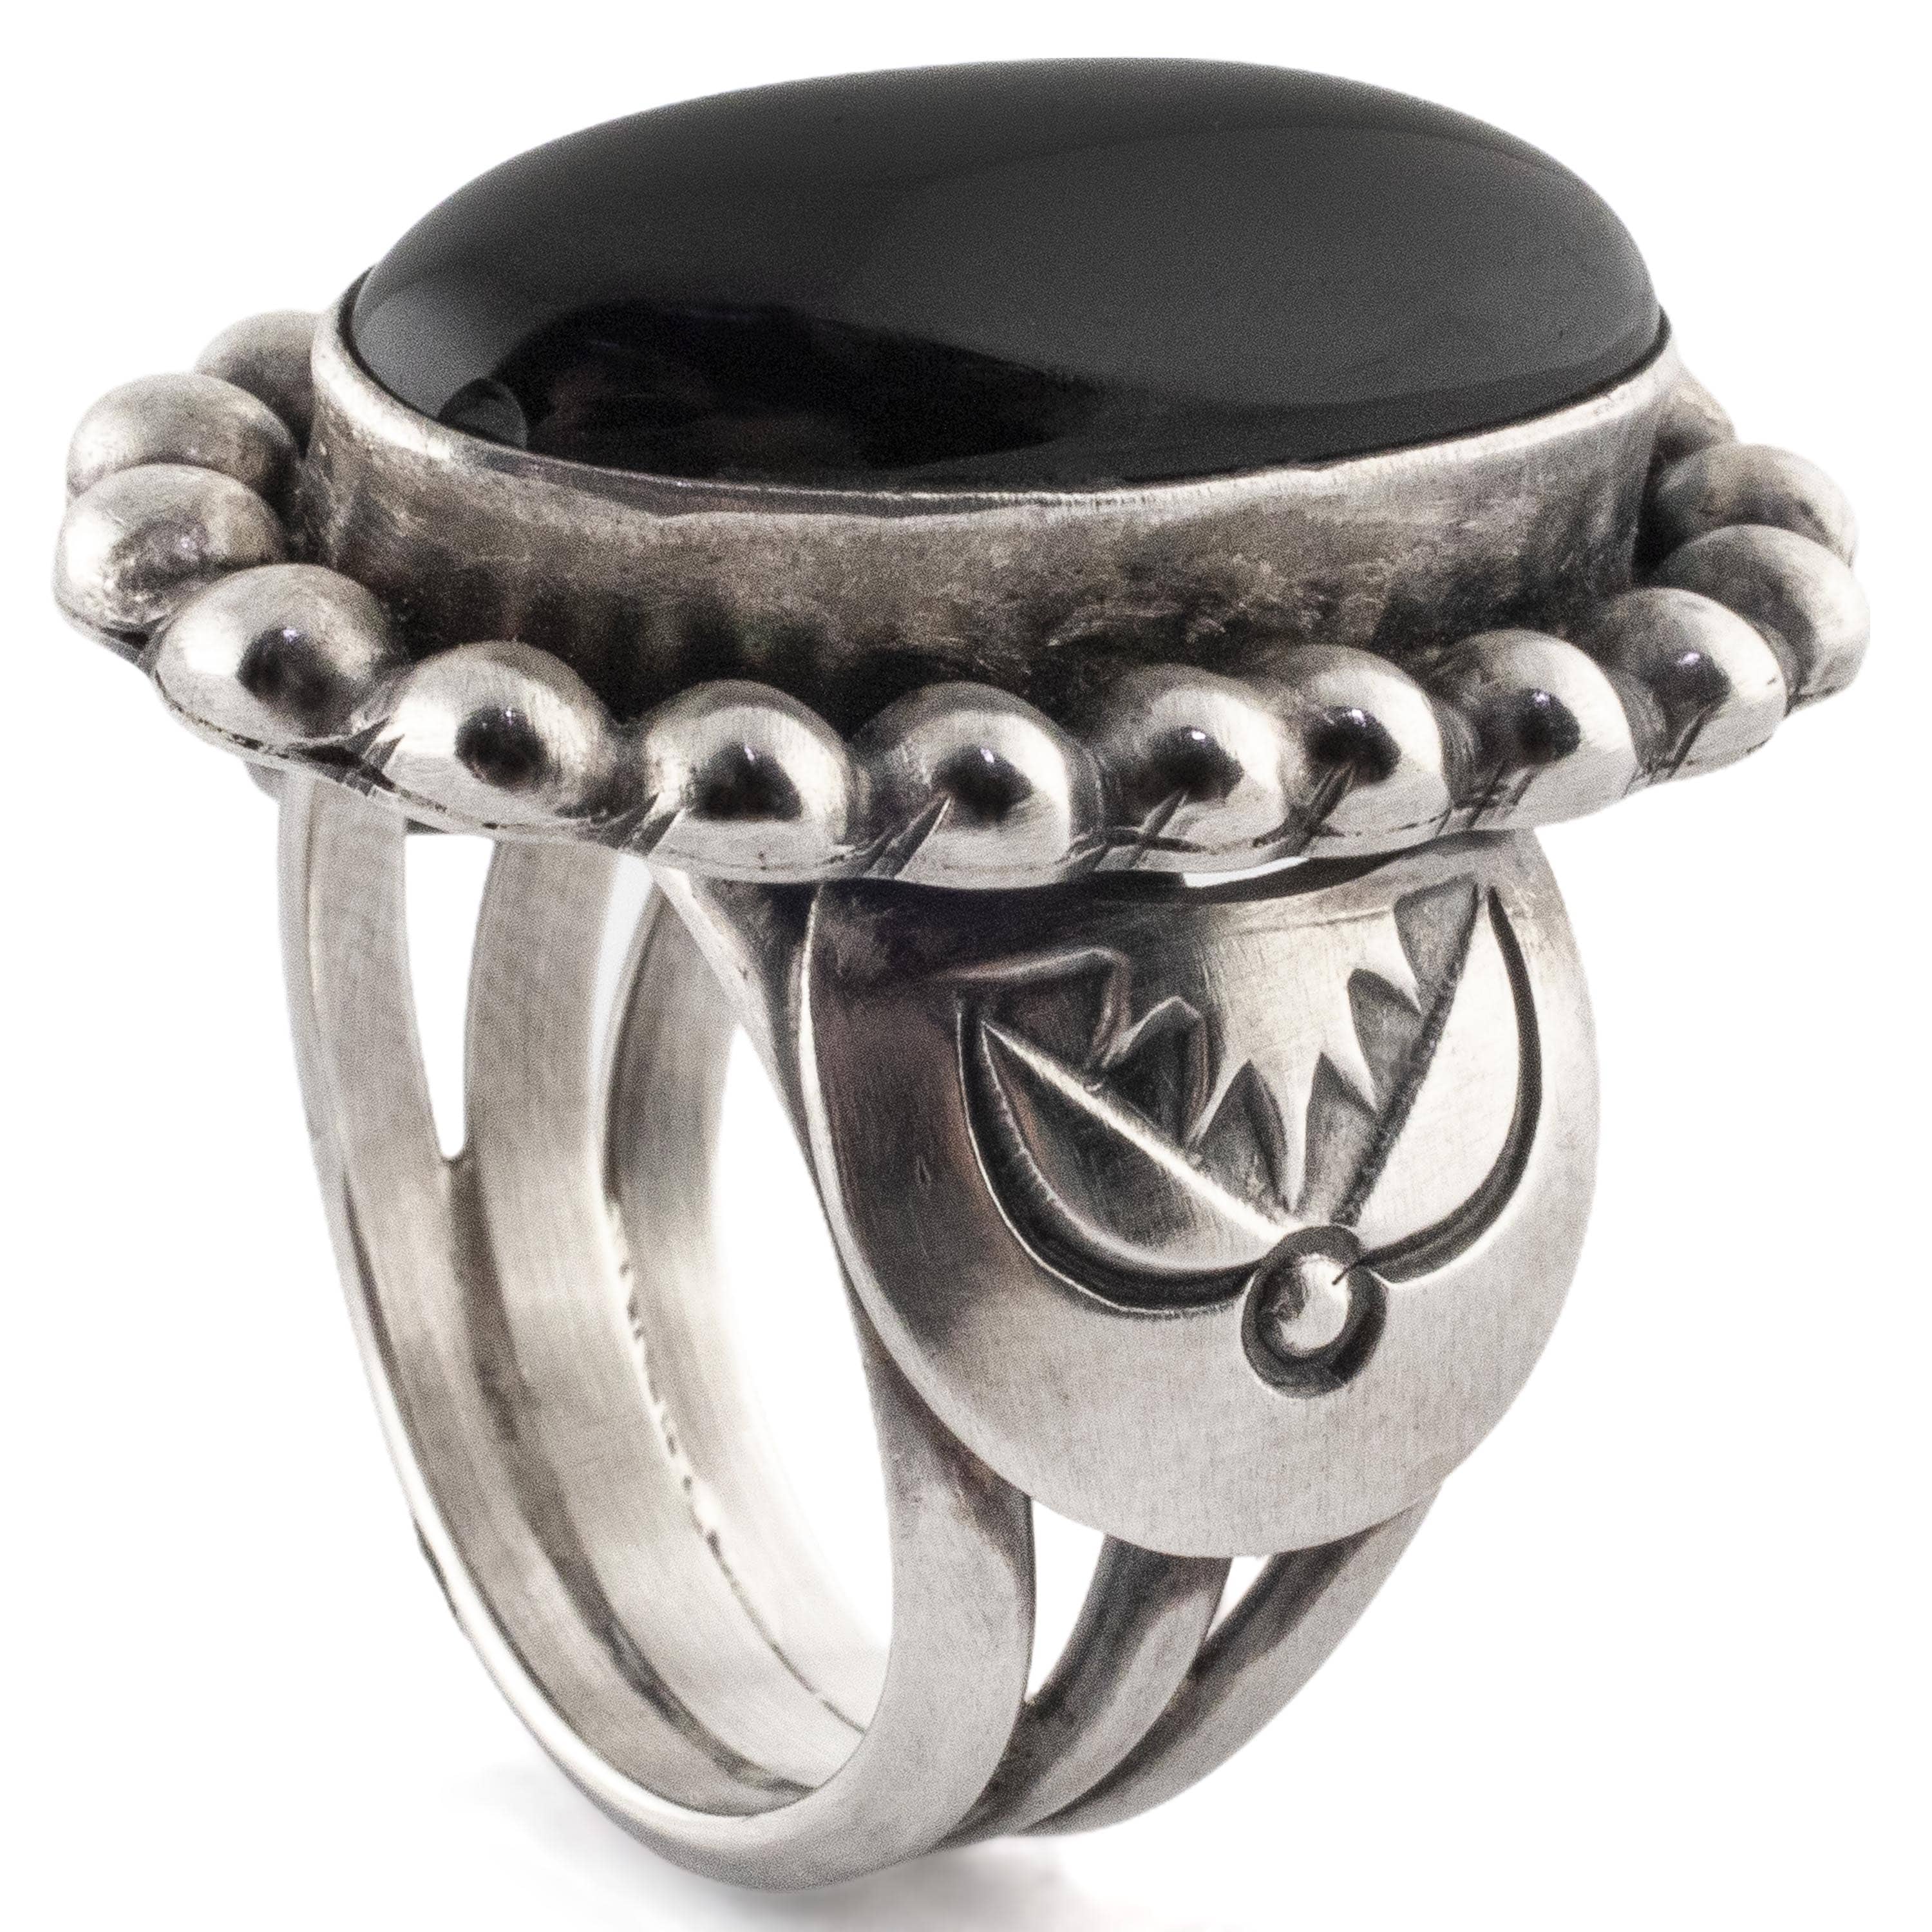 Kalifano Native American Jewelry 10 Paul Livingston Black Onyx USA Native American Made 925 Sterling Silver Ring NAR1000.012.10